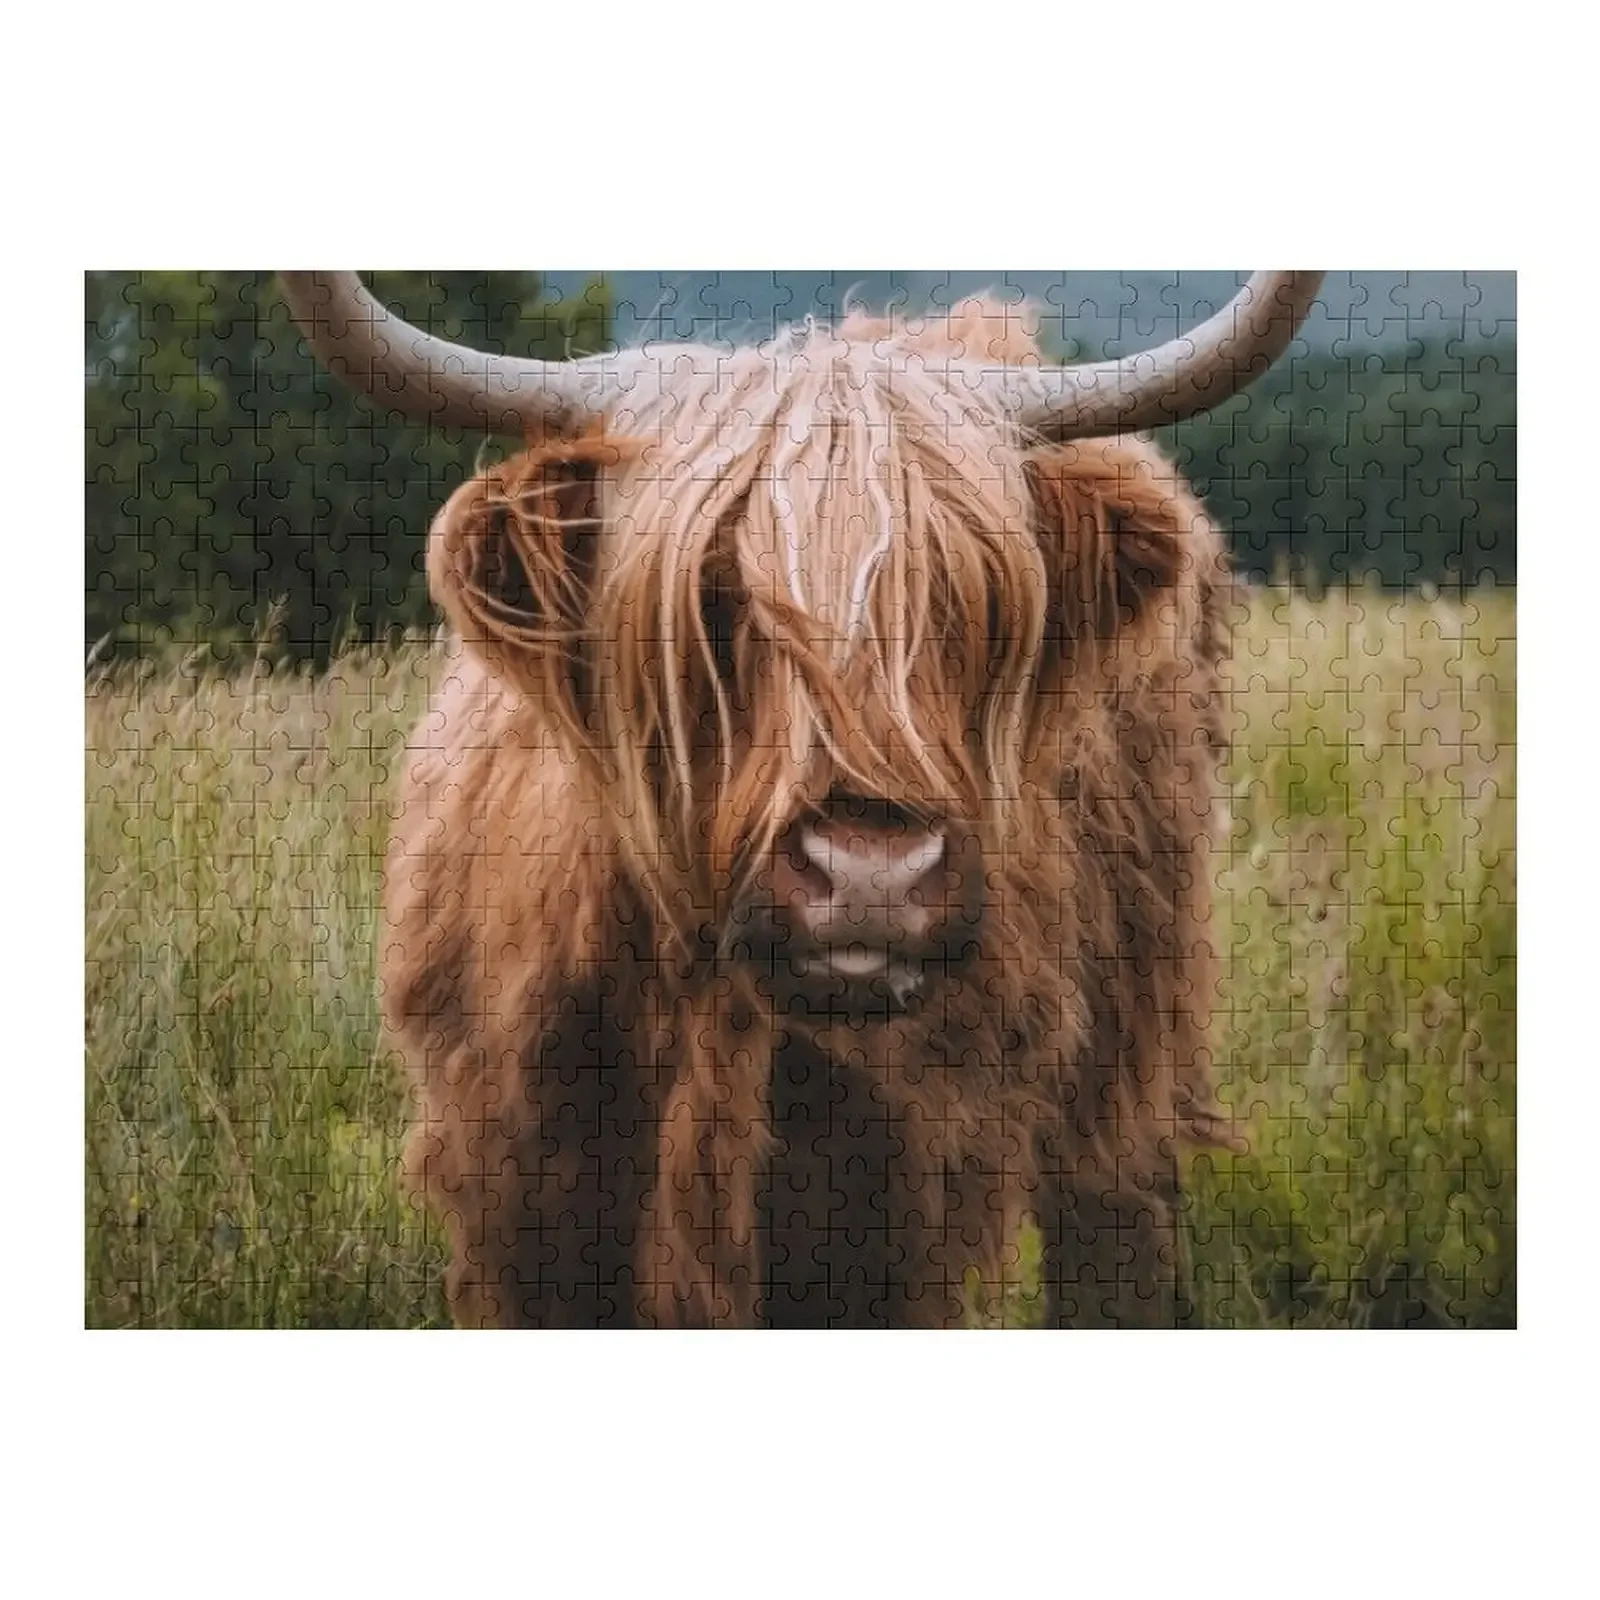 Wooly Cow – Scottish Highland Cattle in Scotland Jigsaw Puzzle Baby Toy Customizable Gift Puzzle